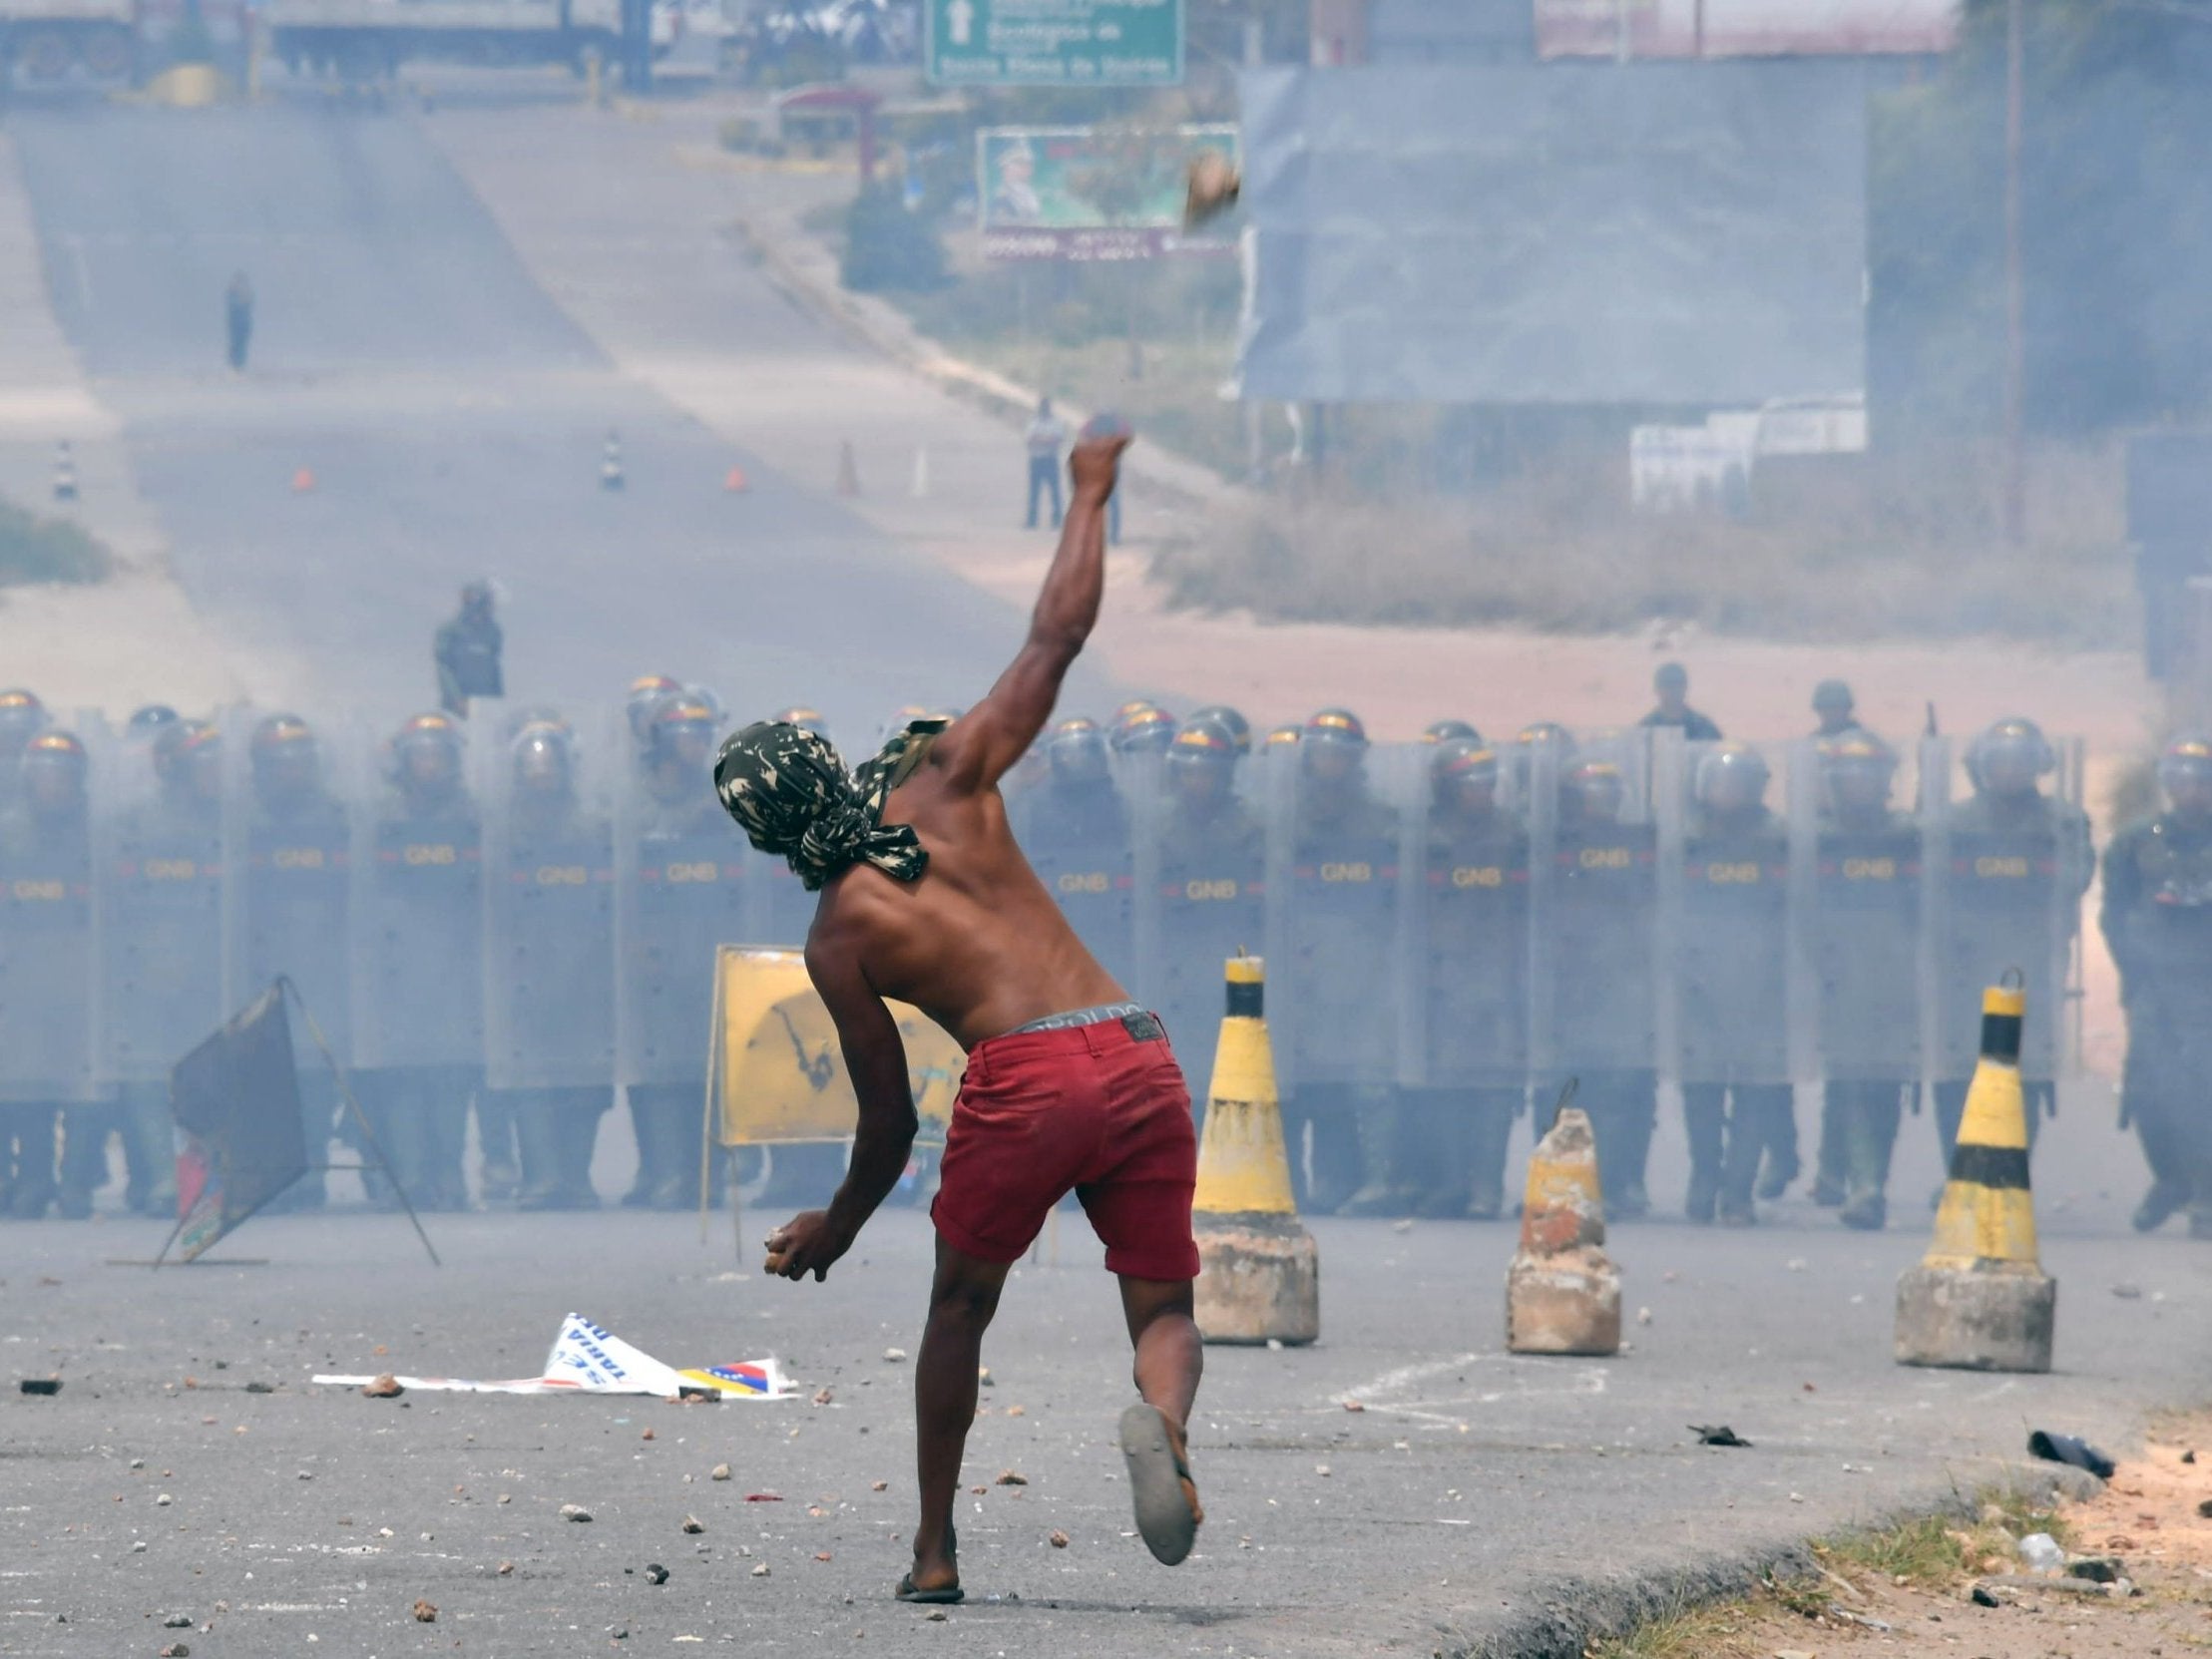 Violence broke out at the Venezuelan borders over the weekend